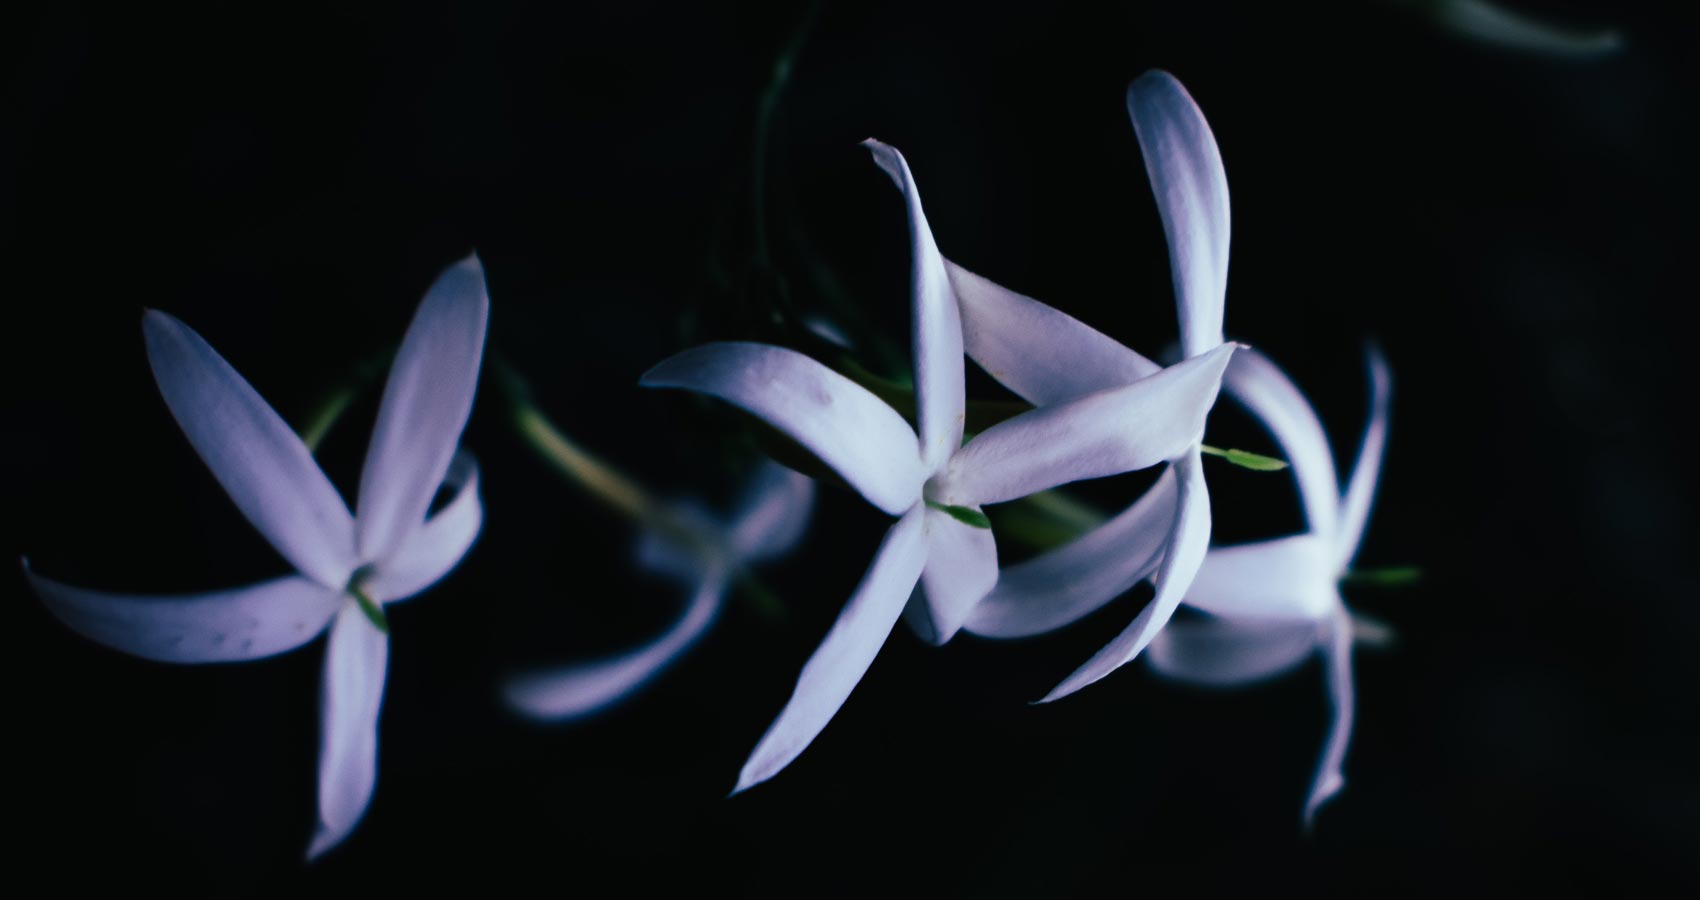 Ode To A Scented Bloom, a poem by Aminath Neena at Spillwords.com